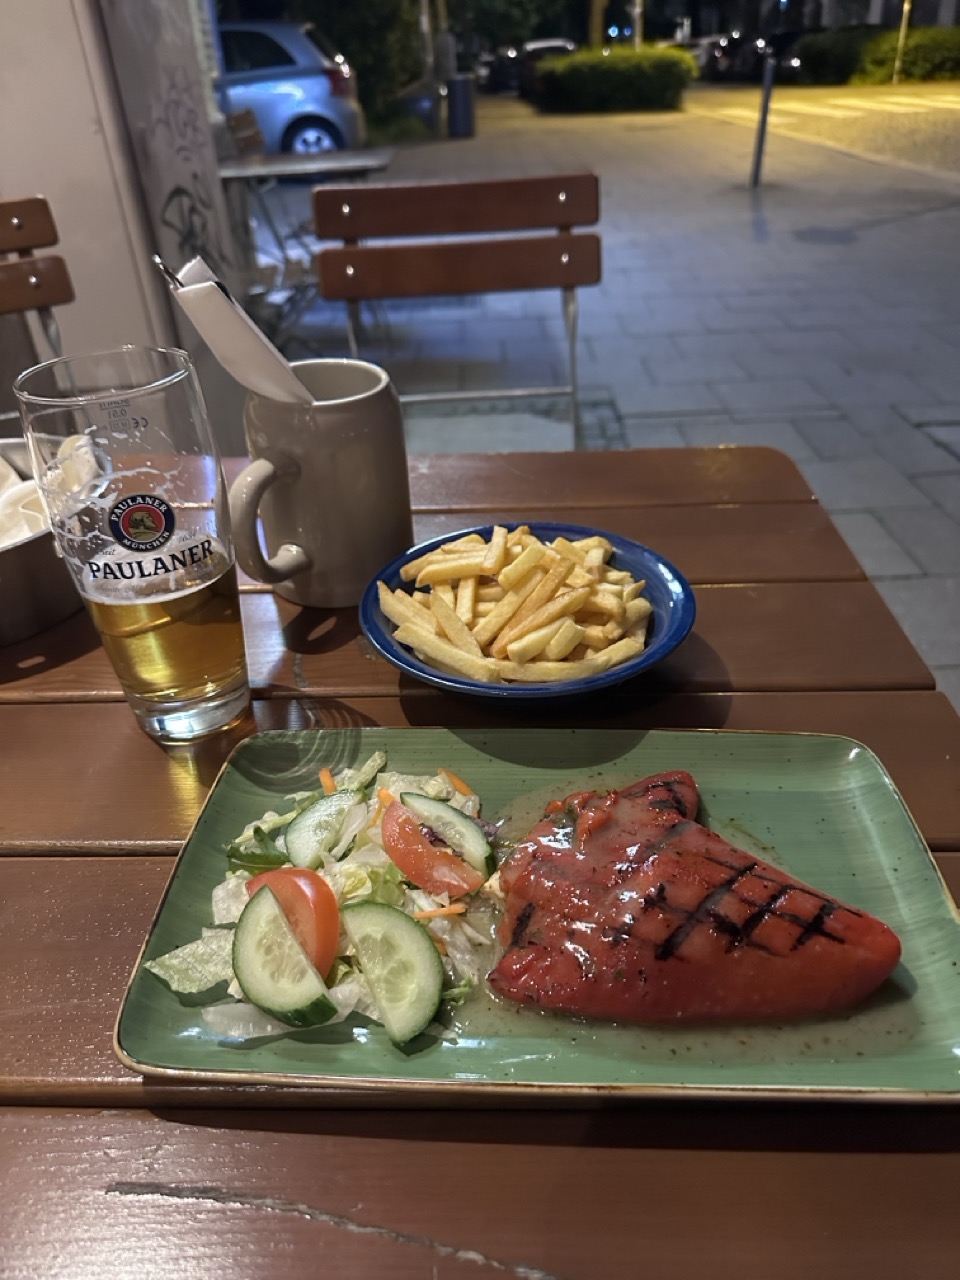 After a very long day, I enjoyed a hearty meal at a local bar down the road. Can you guess what the red item is on my plate?